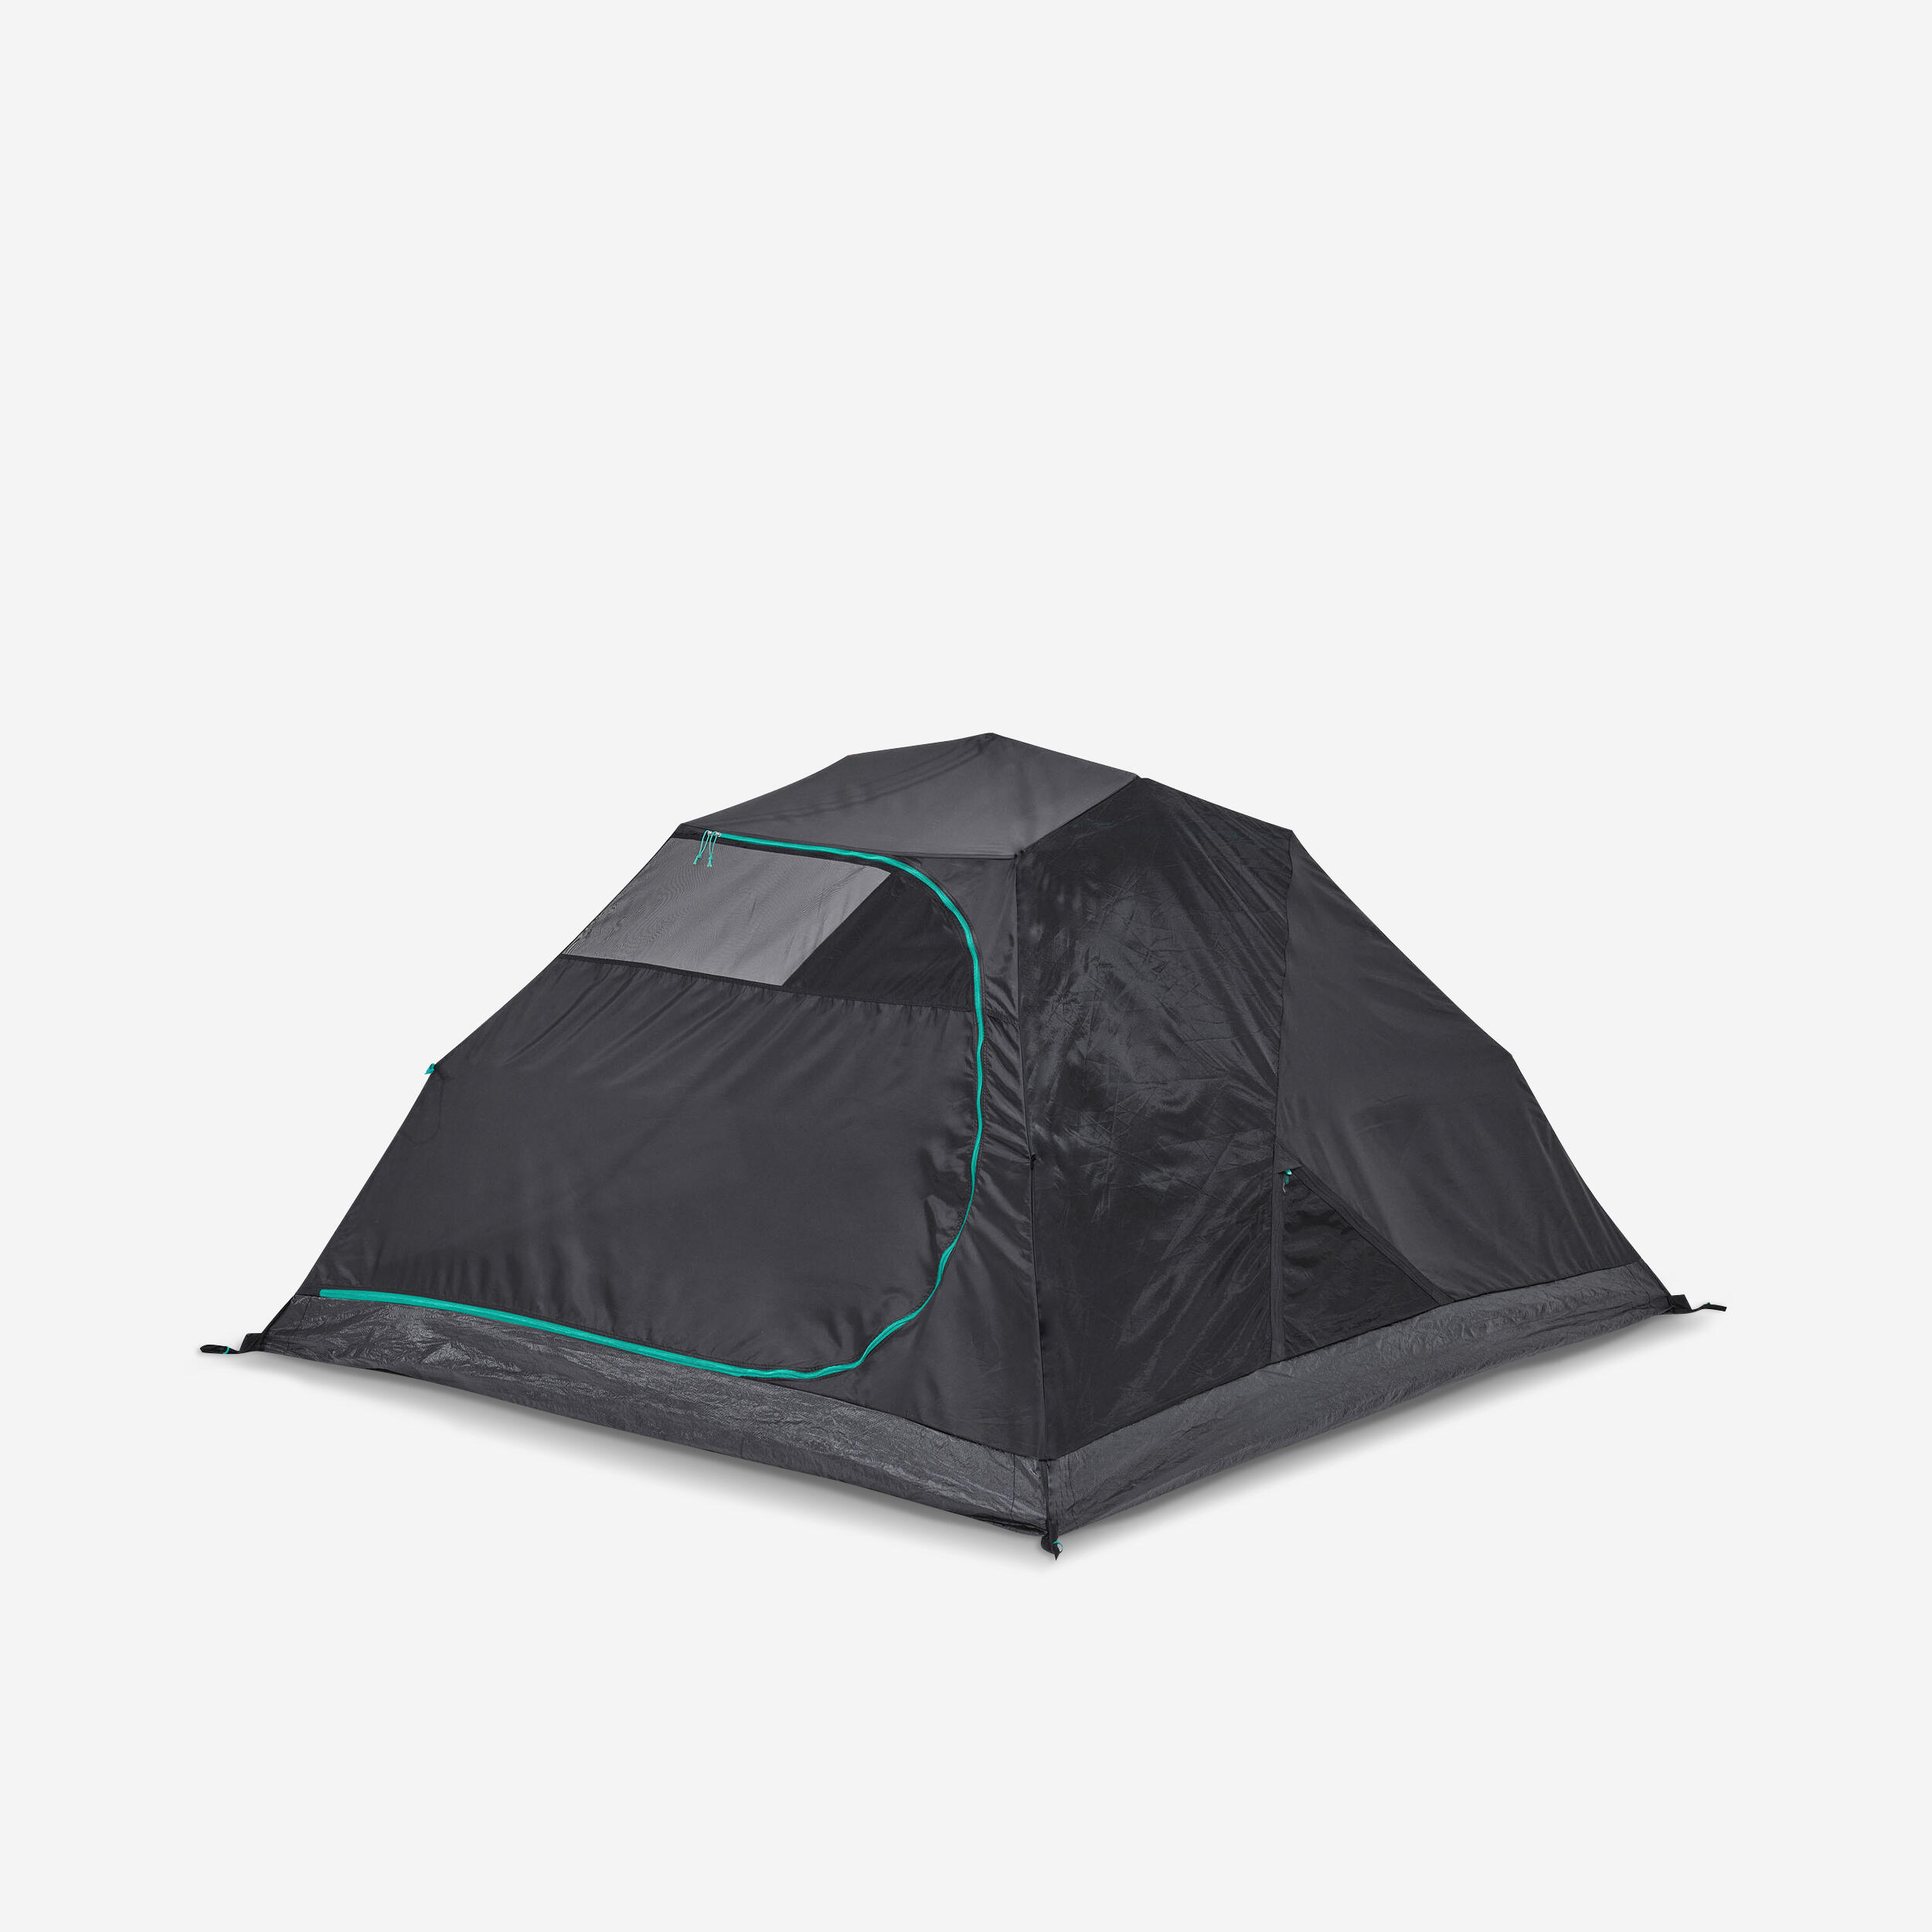 QUECHUA BEDROOM COMPARTMENT - SPARE PART FOR MH100 FRESH&BLACK 3-PERSON TENT